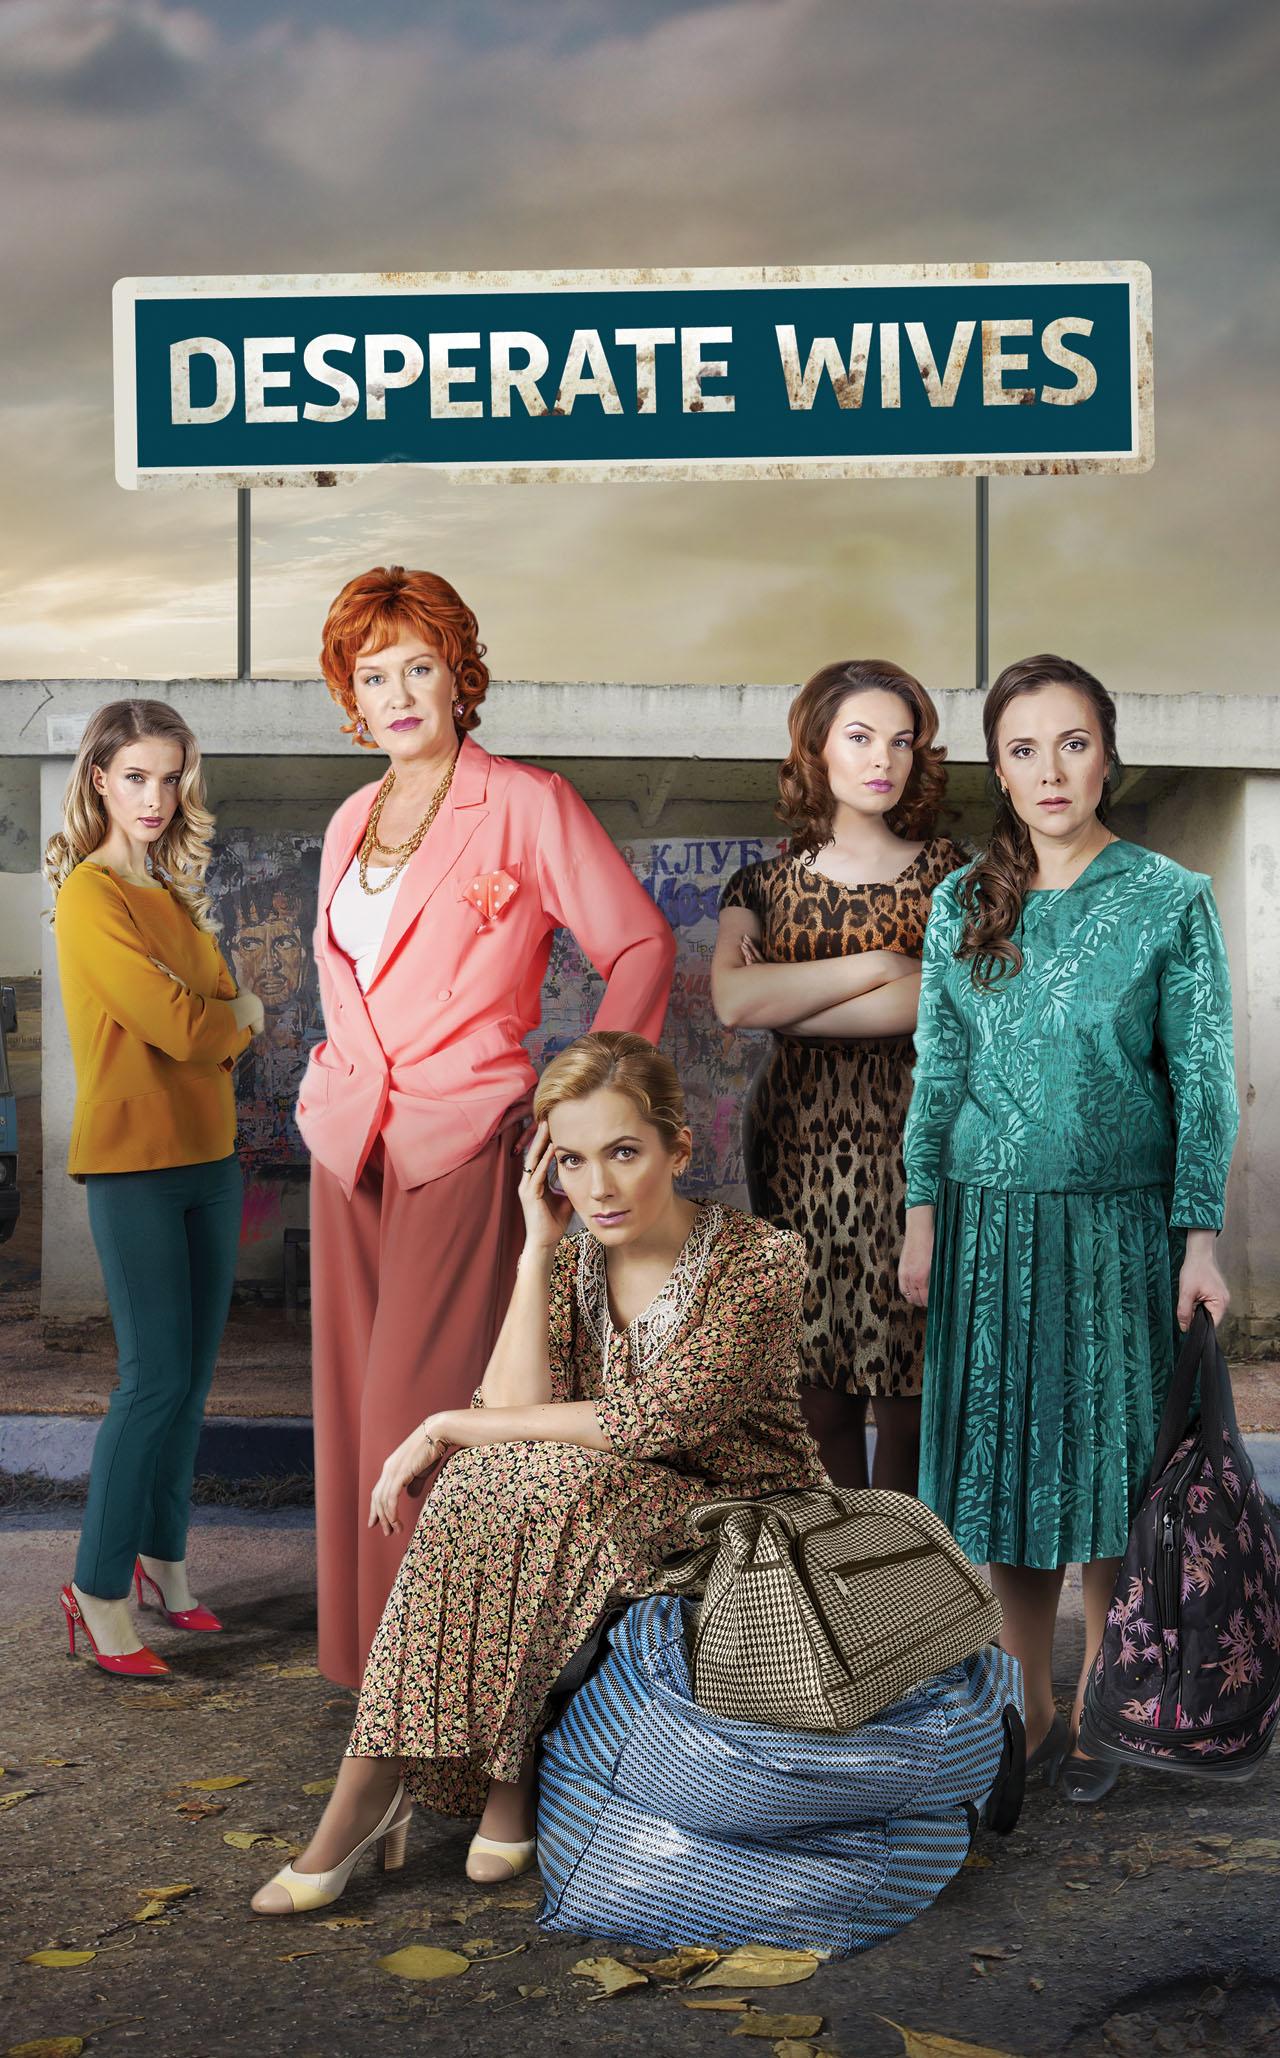 "DESPERATE WIVES" AND "JANISSARY" TO AIR IN POLAND